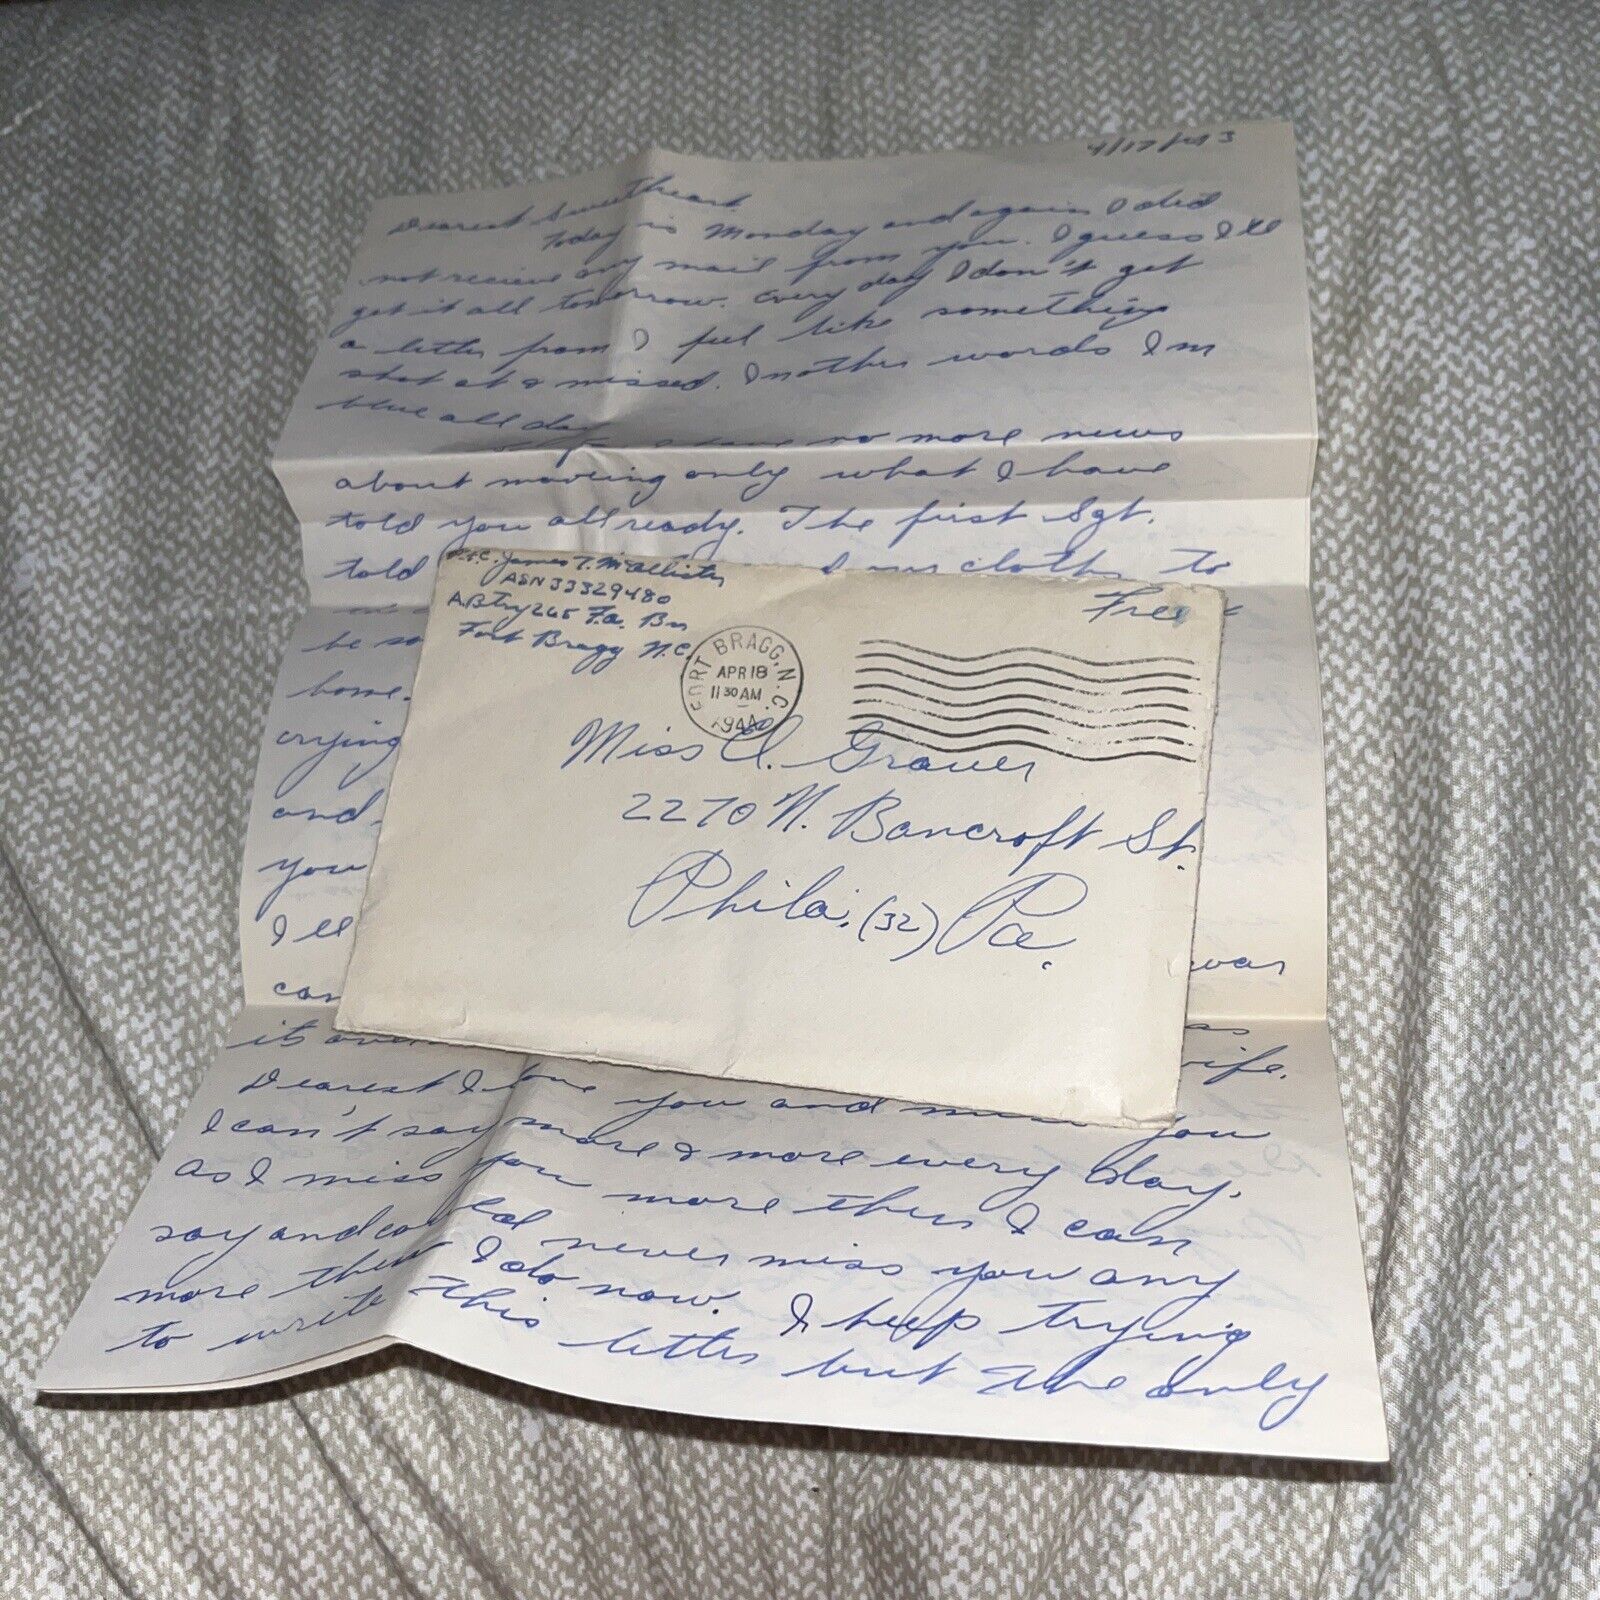 3 1944 WWII Fort Bragg PFC Love Letters Going Overseas Someplace Wanting Fight